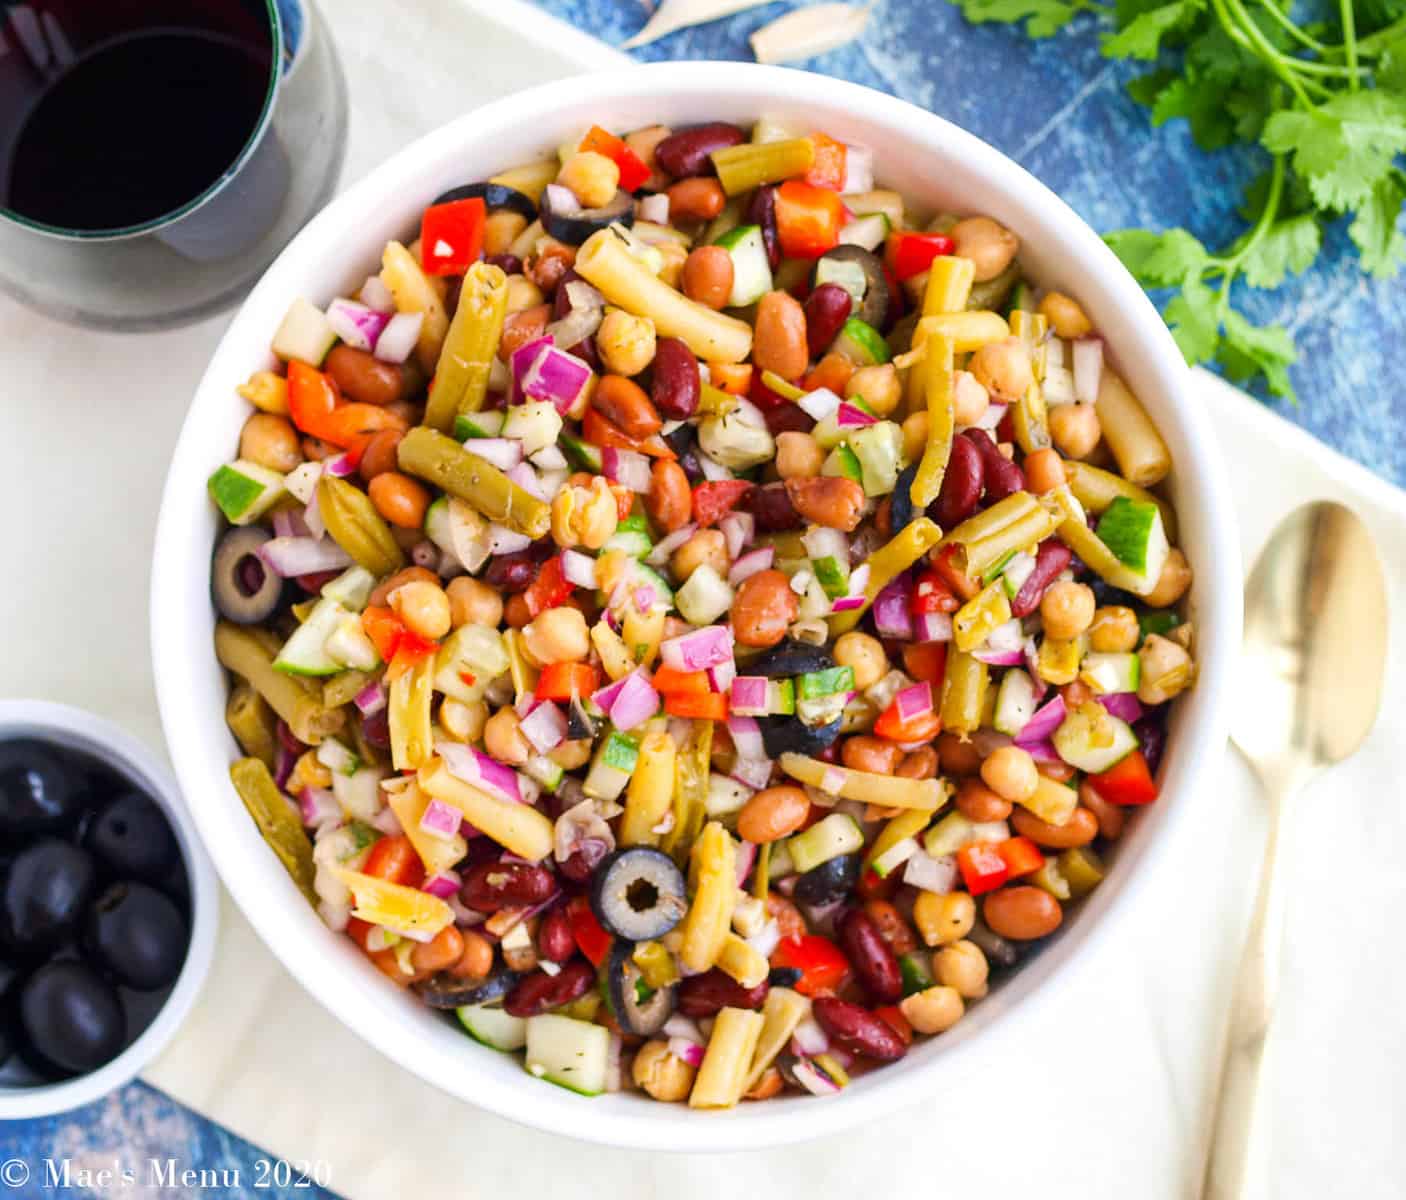 A large bowl of five bean salad with a dish of olives, a spoon, herbs, and a glass of wine next to it.